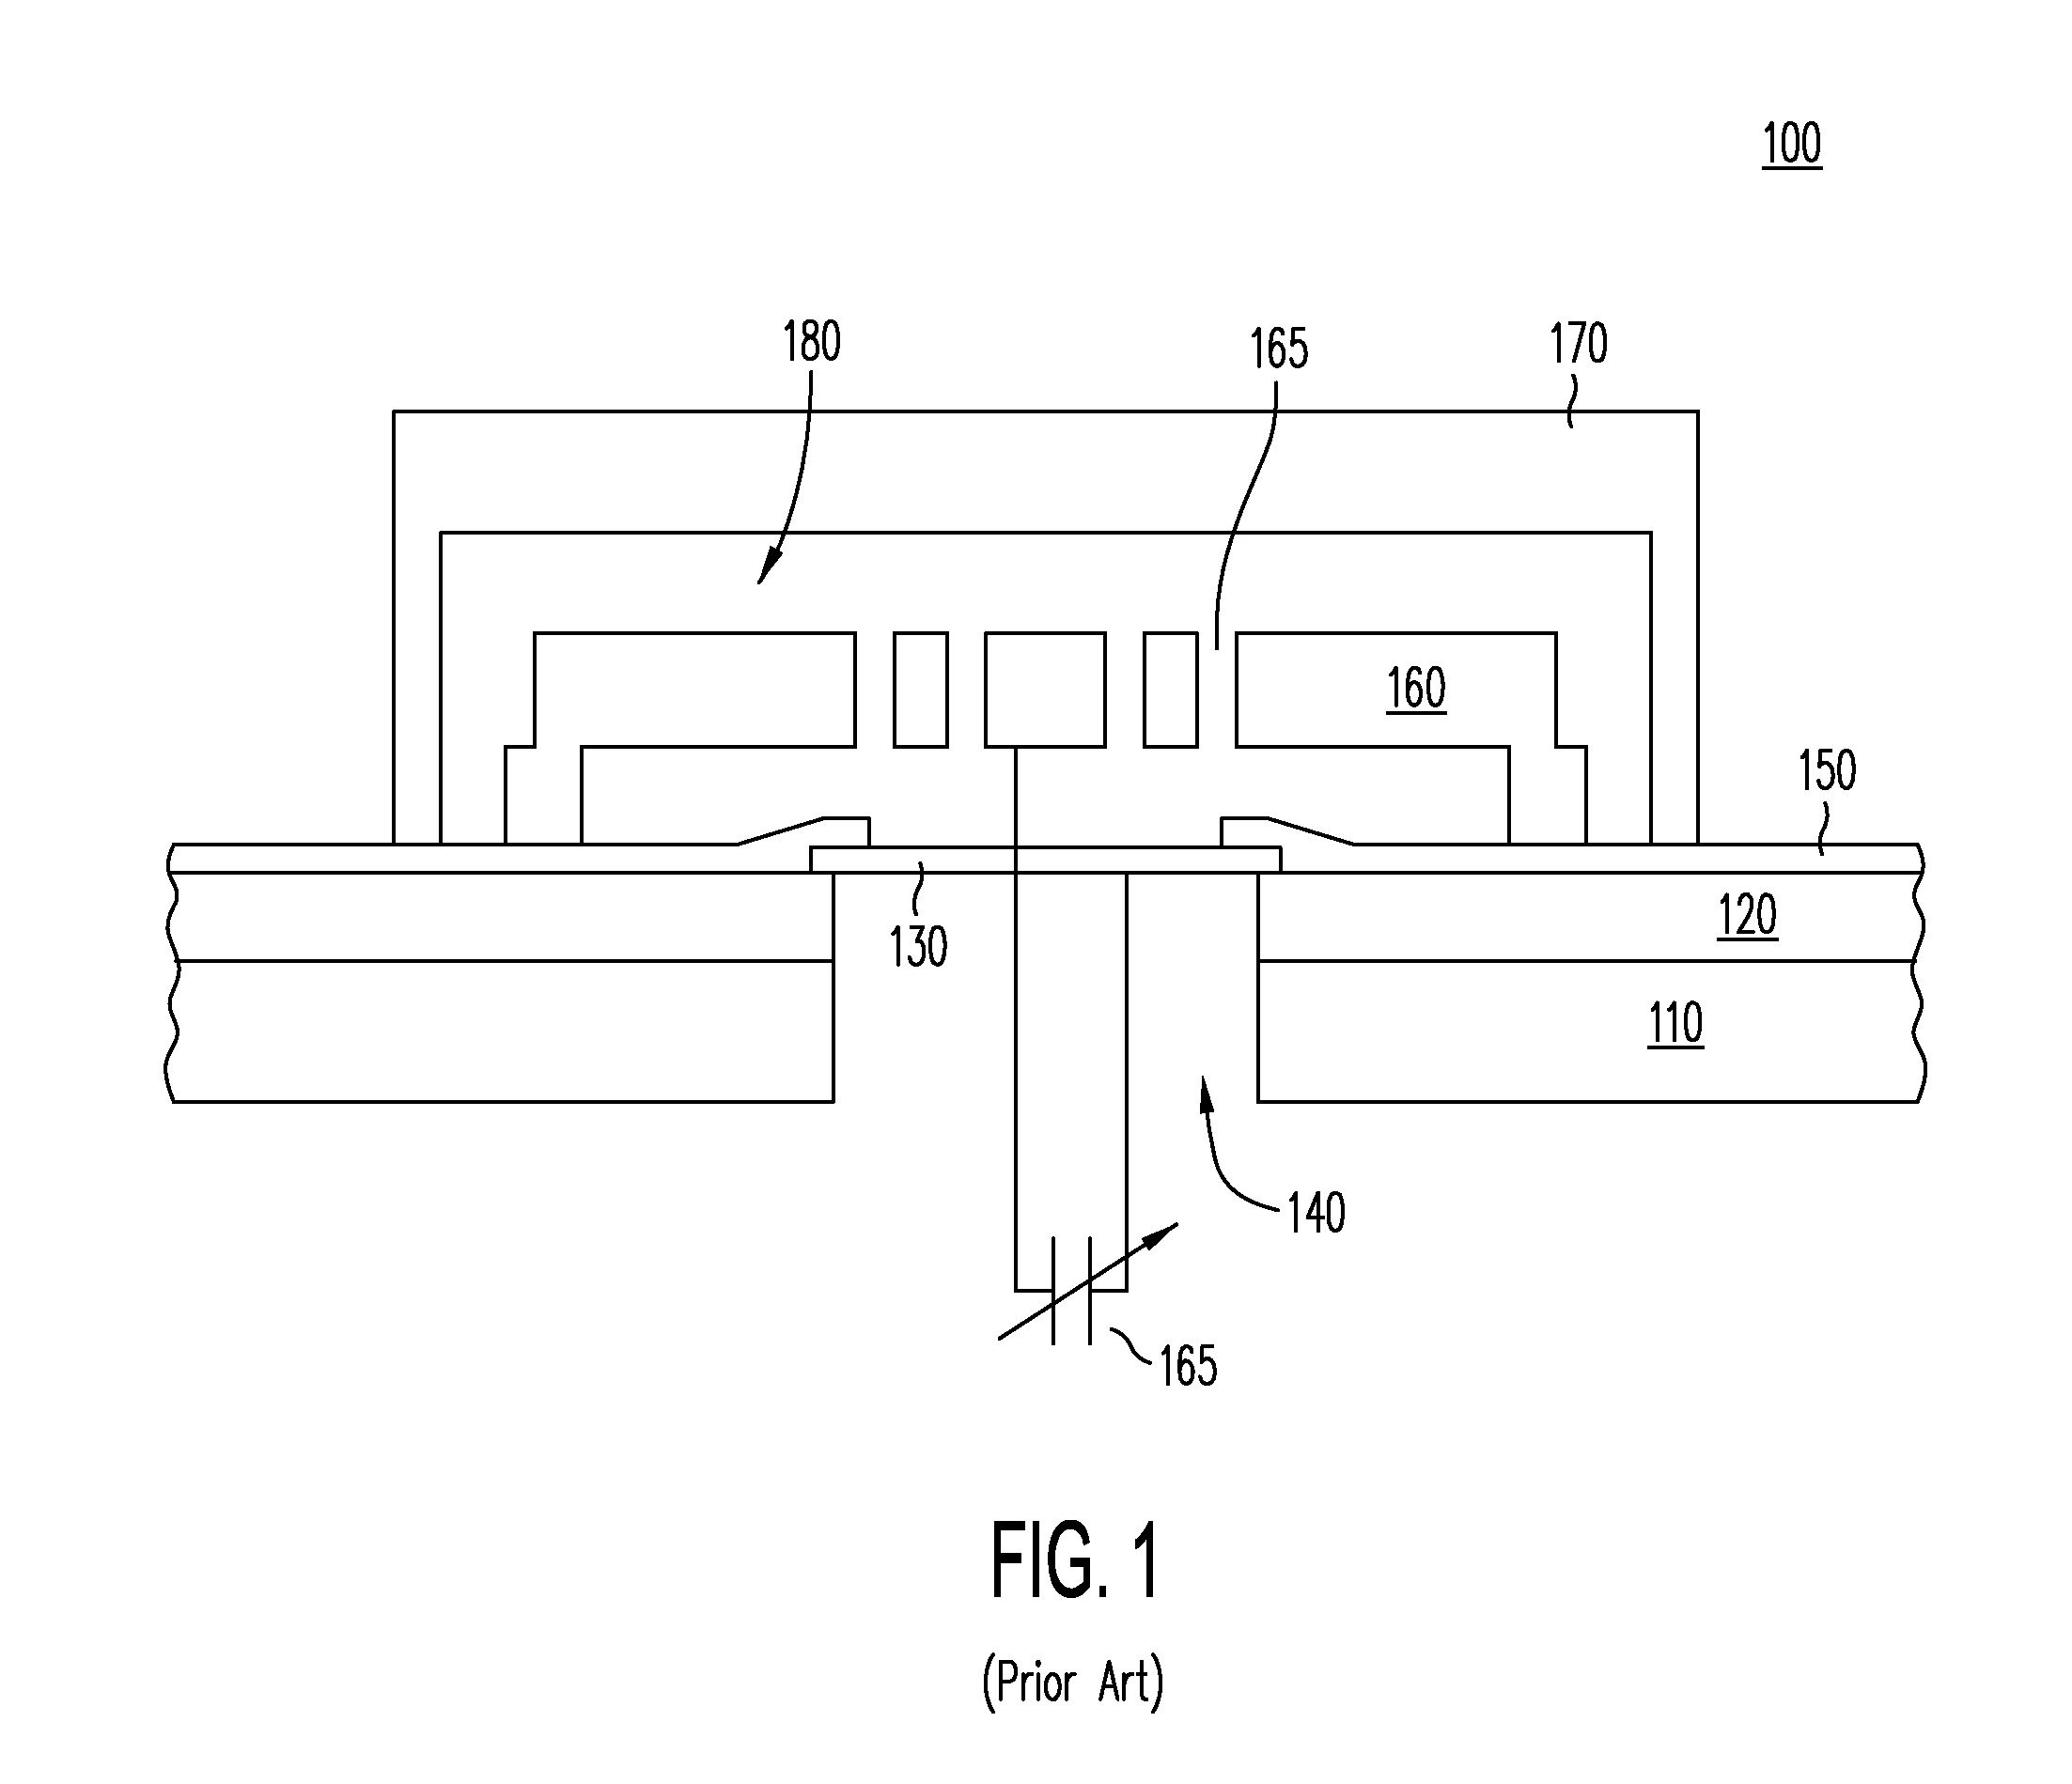 Pressure sensor with differential capacitive output